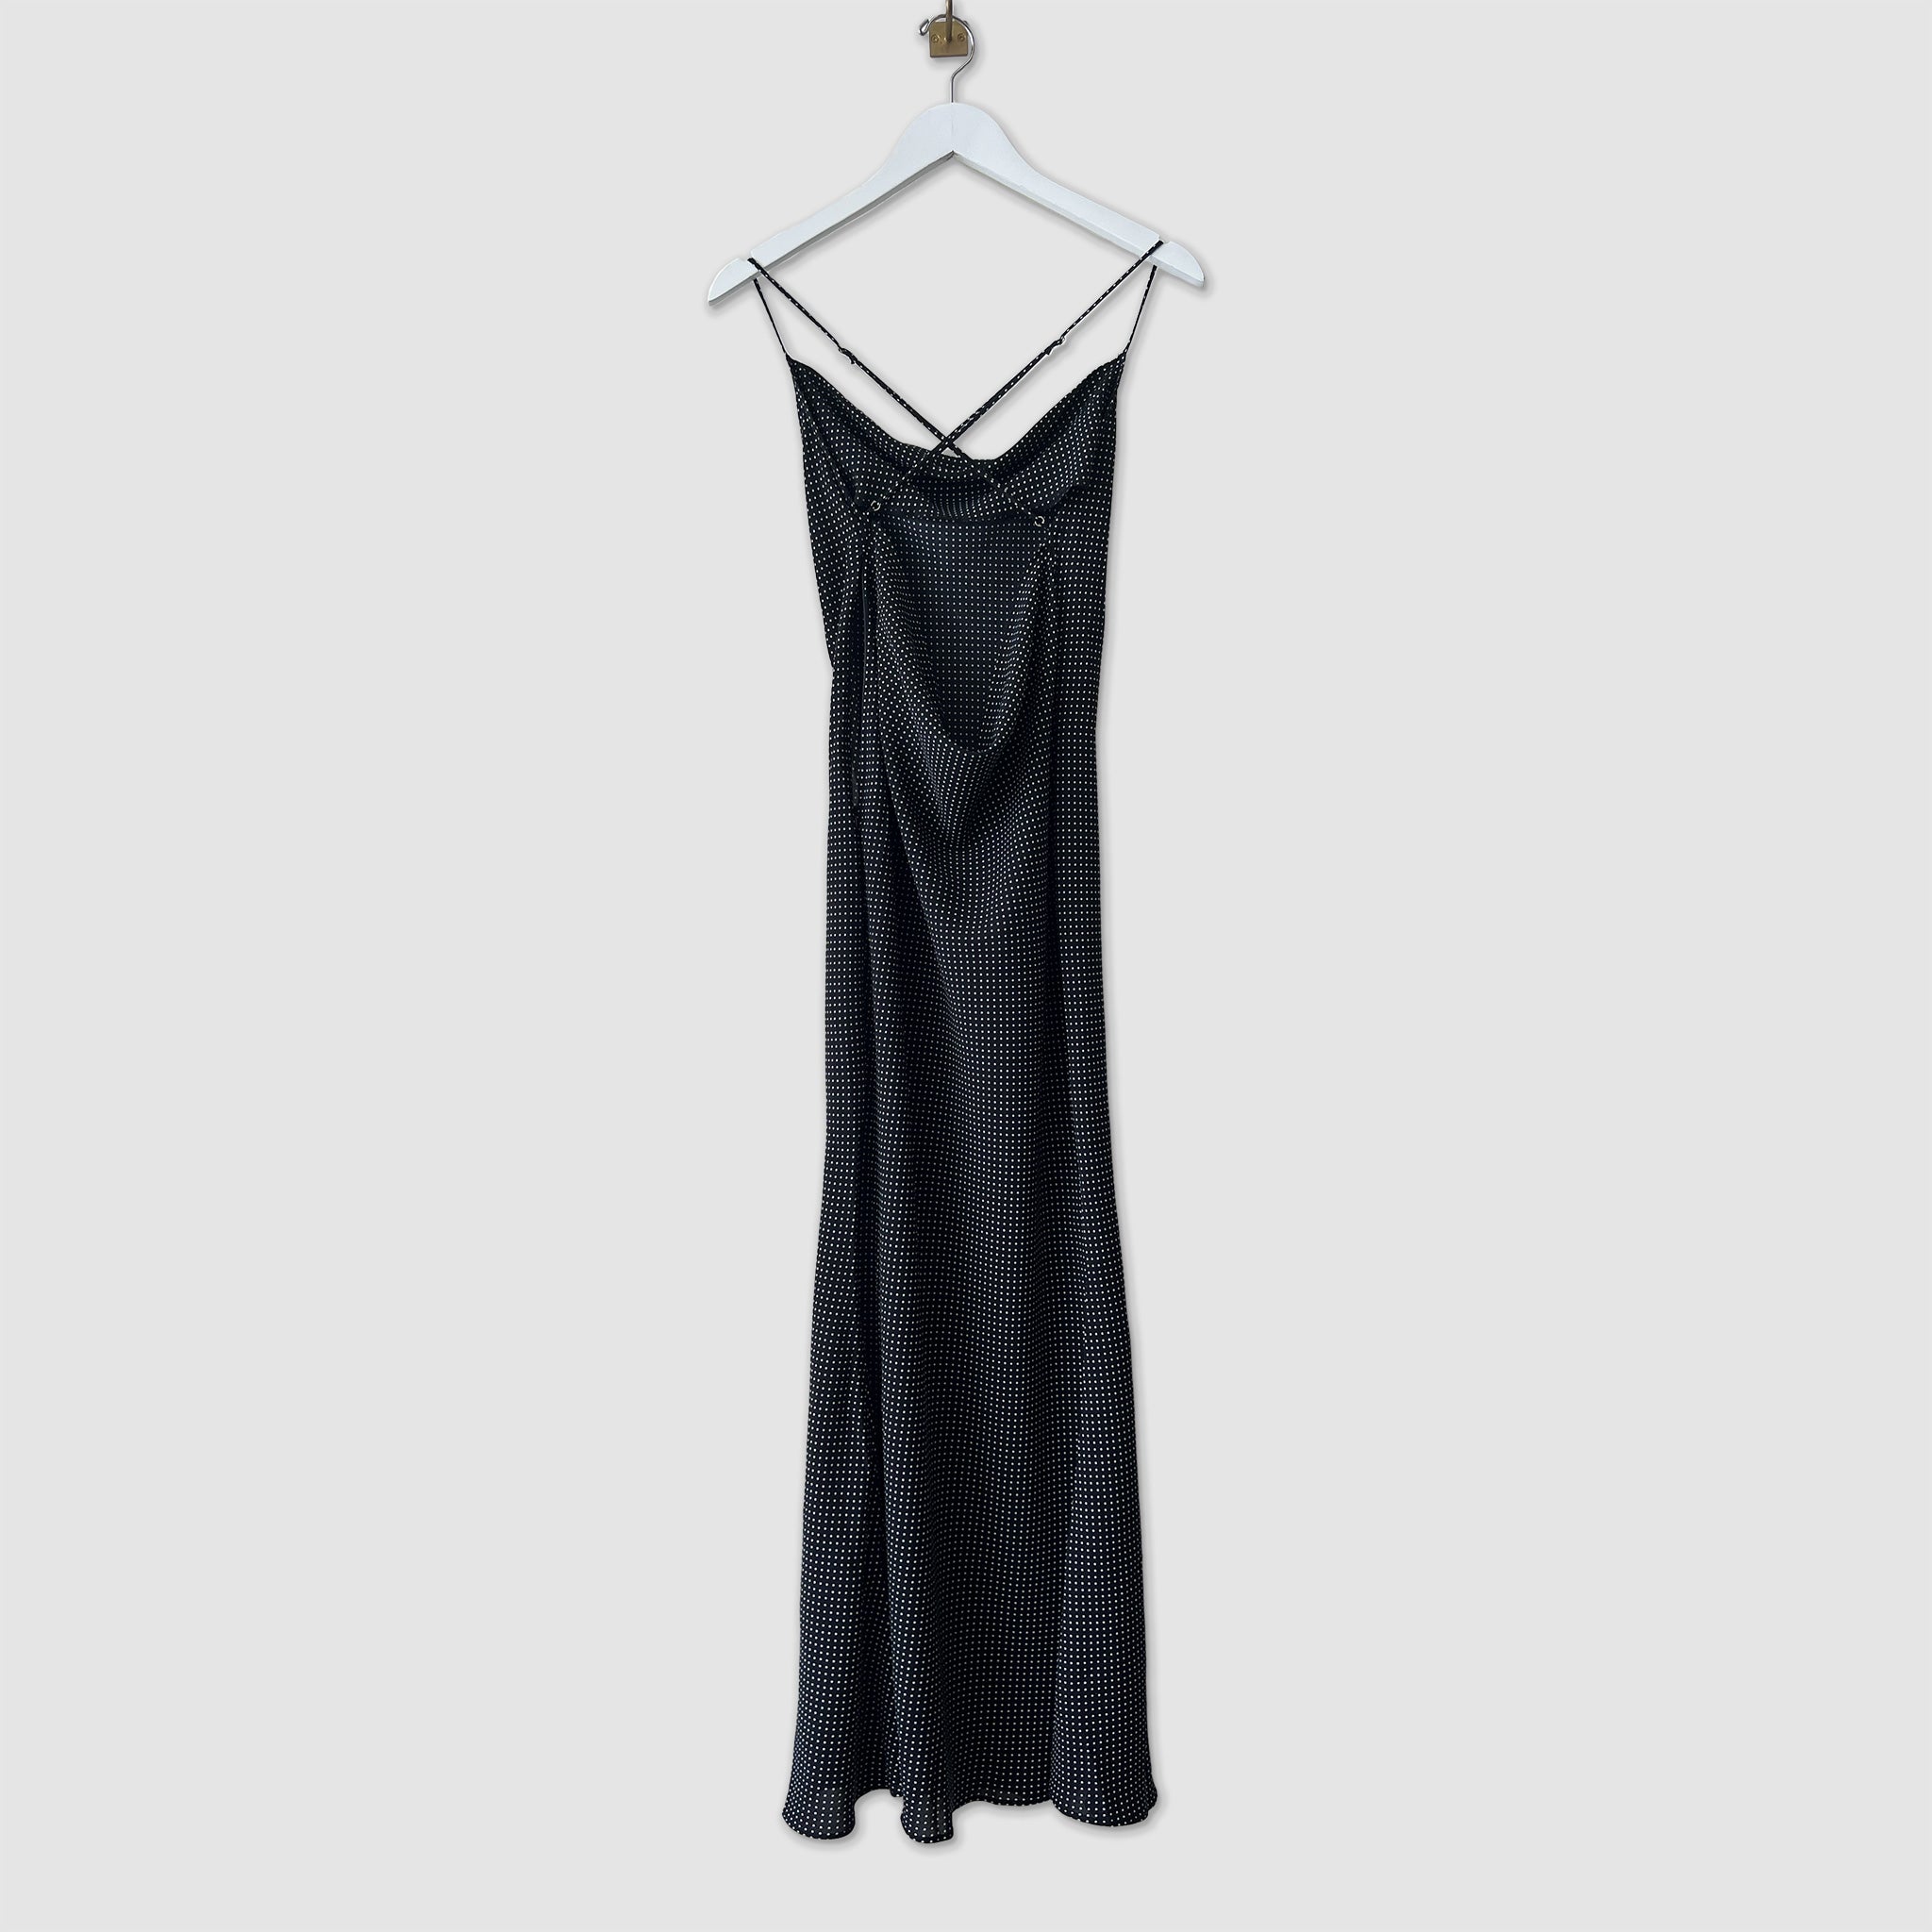 Cowl neck slip dress in black with tiny white dots, back view.